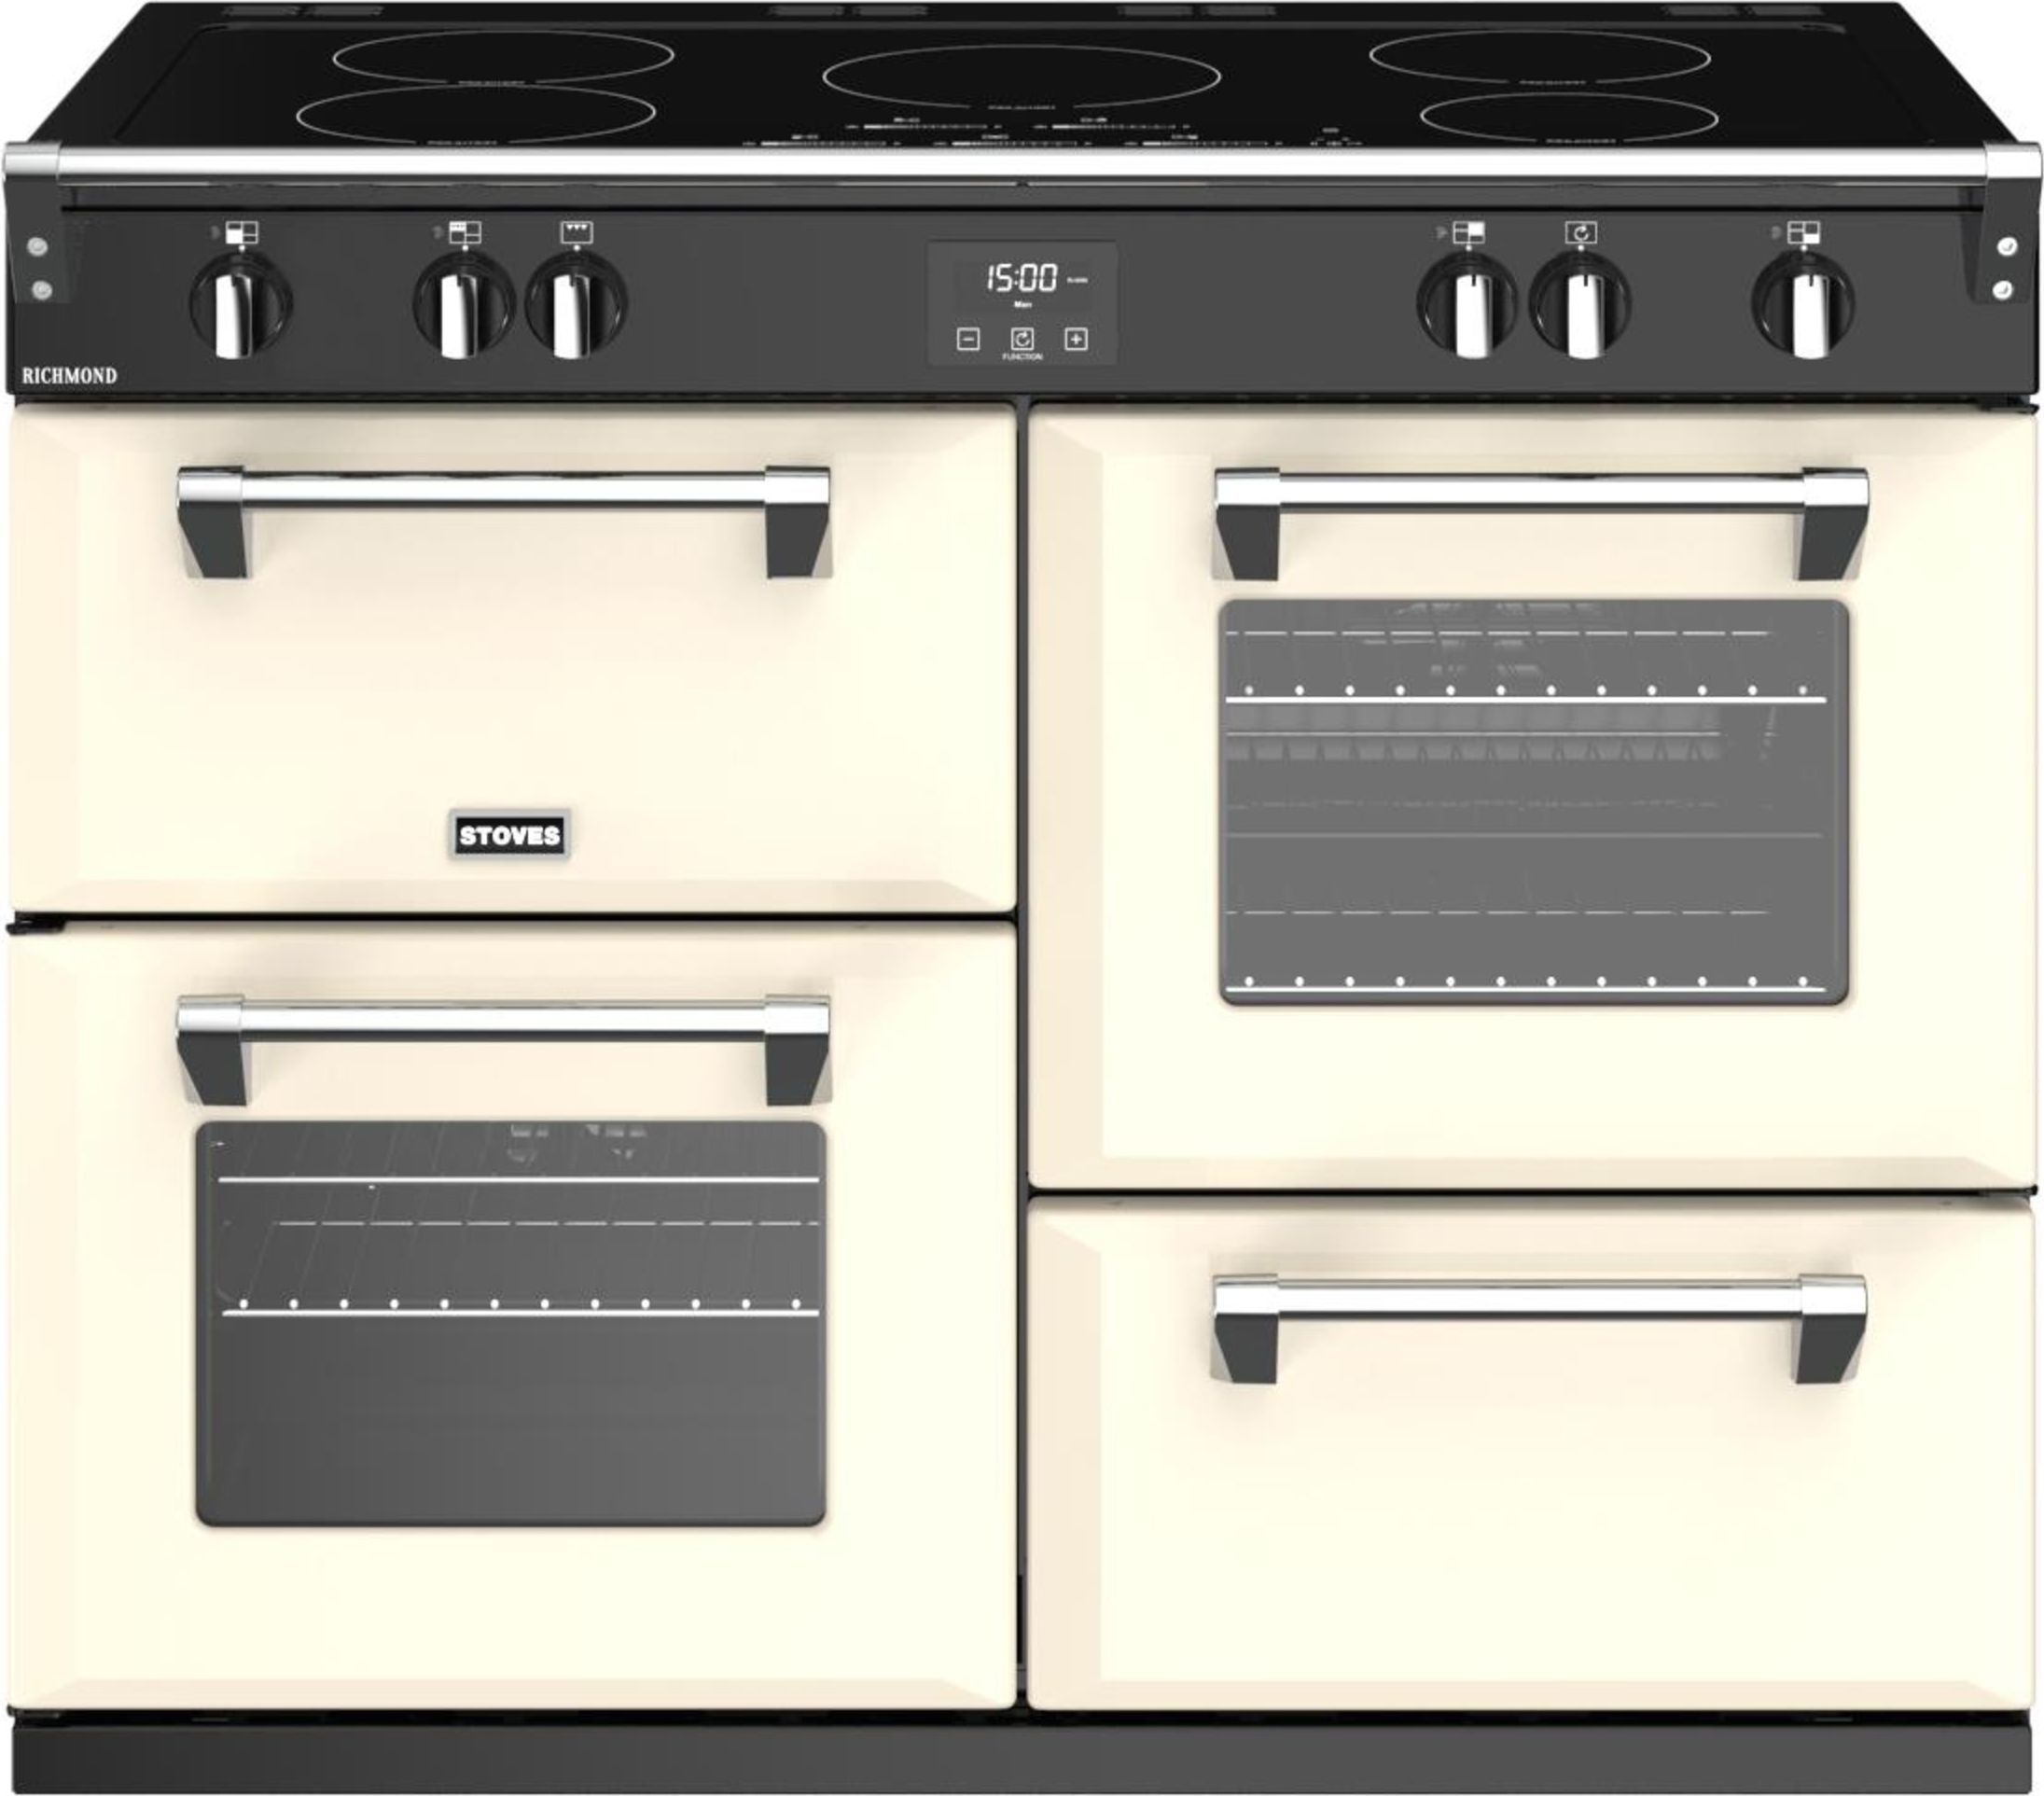 Stoves Richmond ST RICH S1100Ei MK22 CC 110cm Electric Range Cooker with Induction Hob - Cream - A Rated, Cream